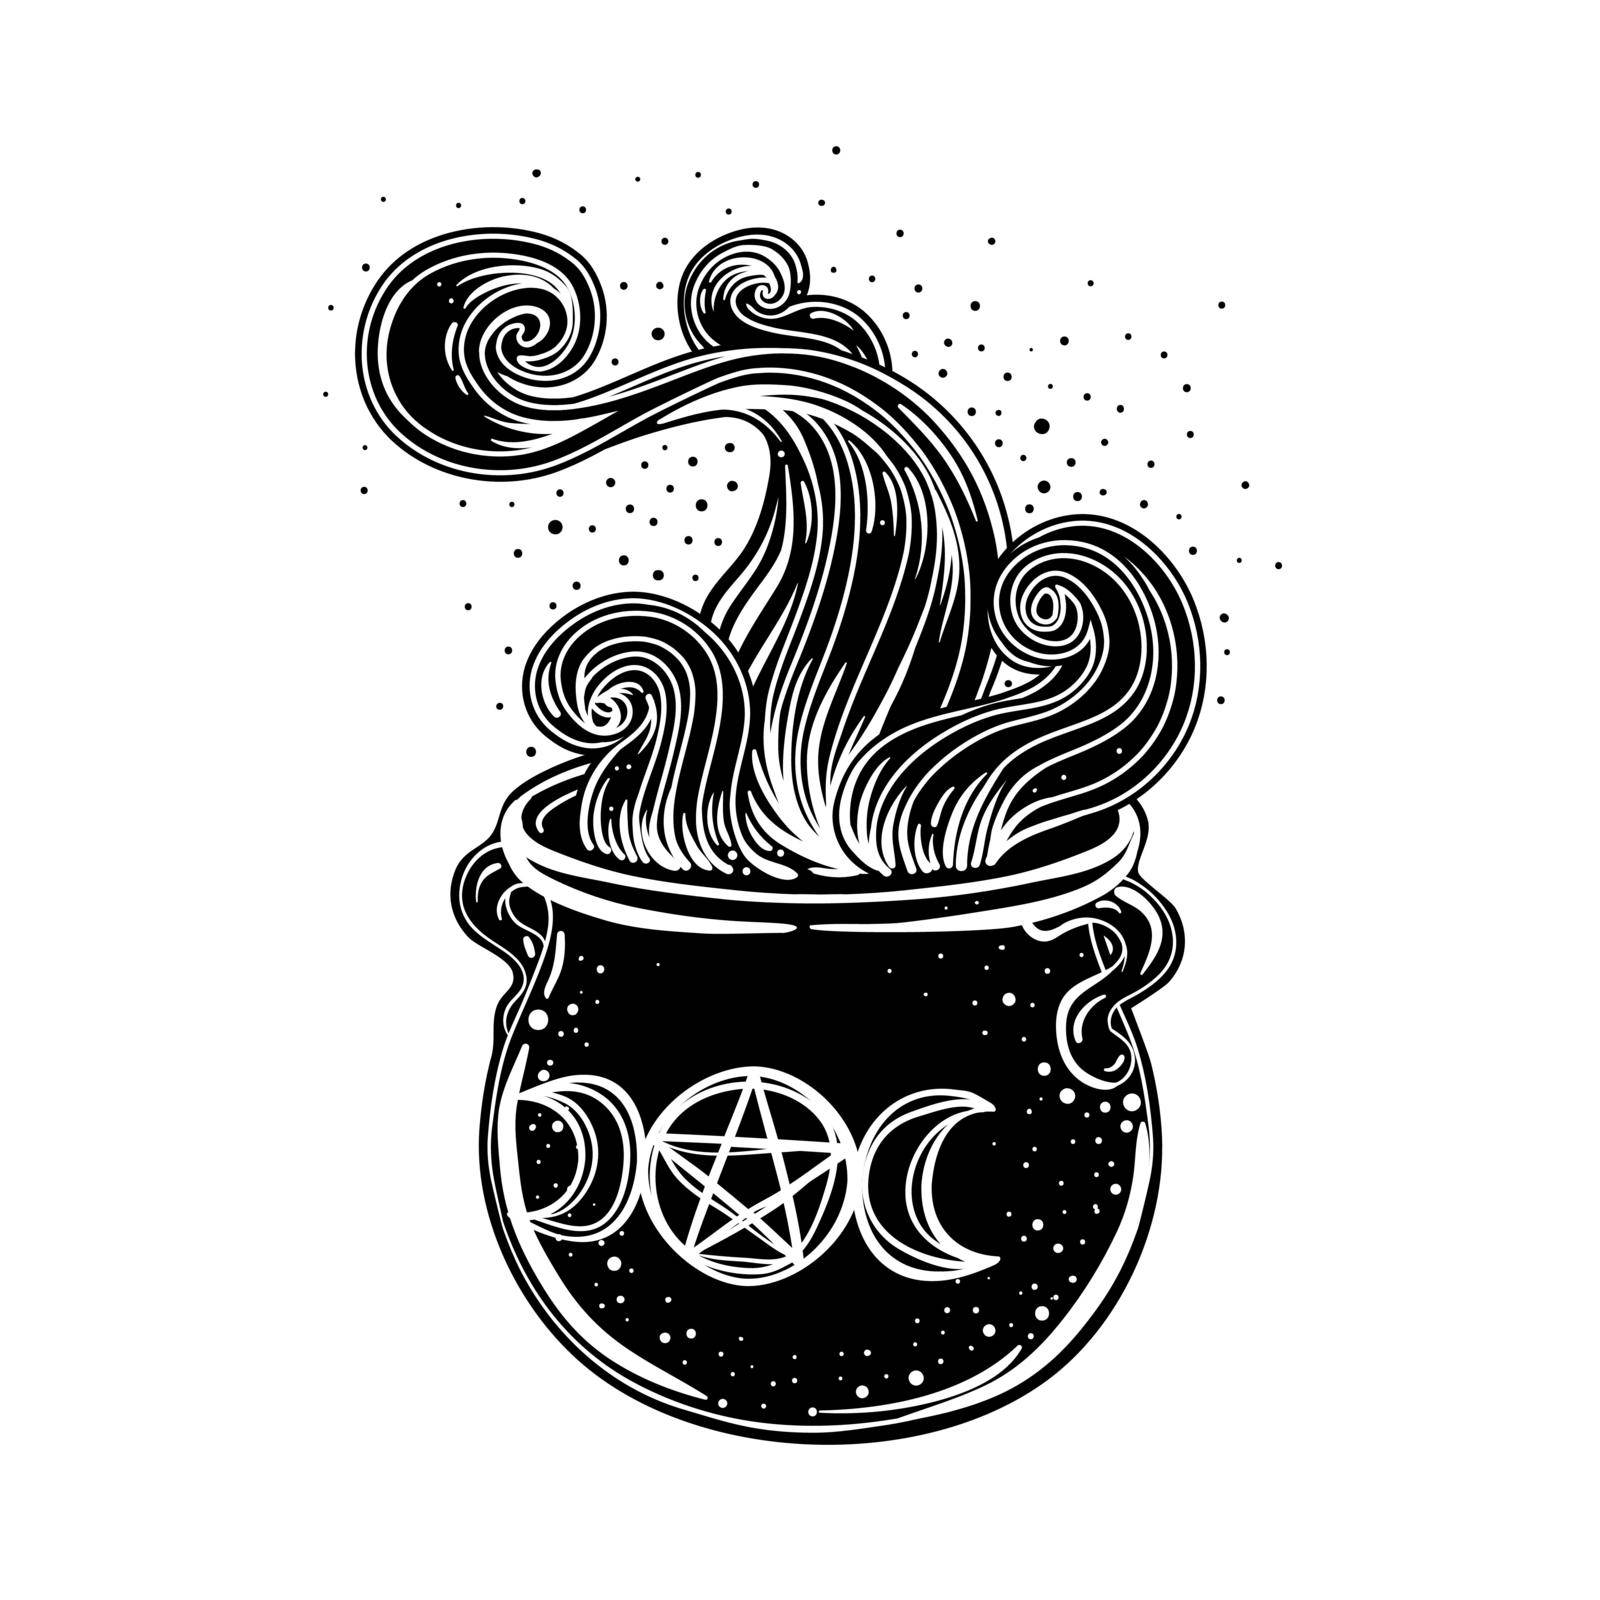 Witches cauldron. Vector isolated illustration in Victorian style. Mediumship divination equipment. flash tattoo drawing. Alchemy, religion, spirituality, occultism.